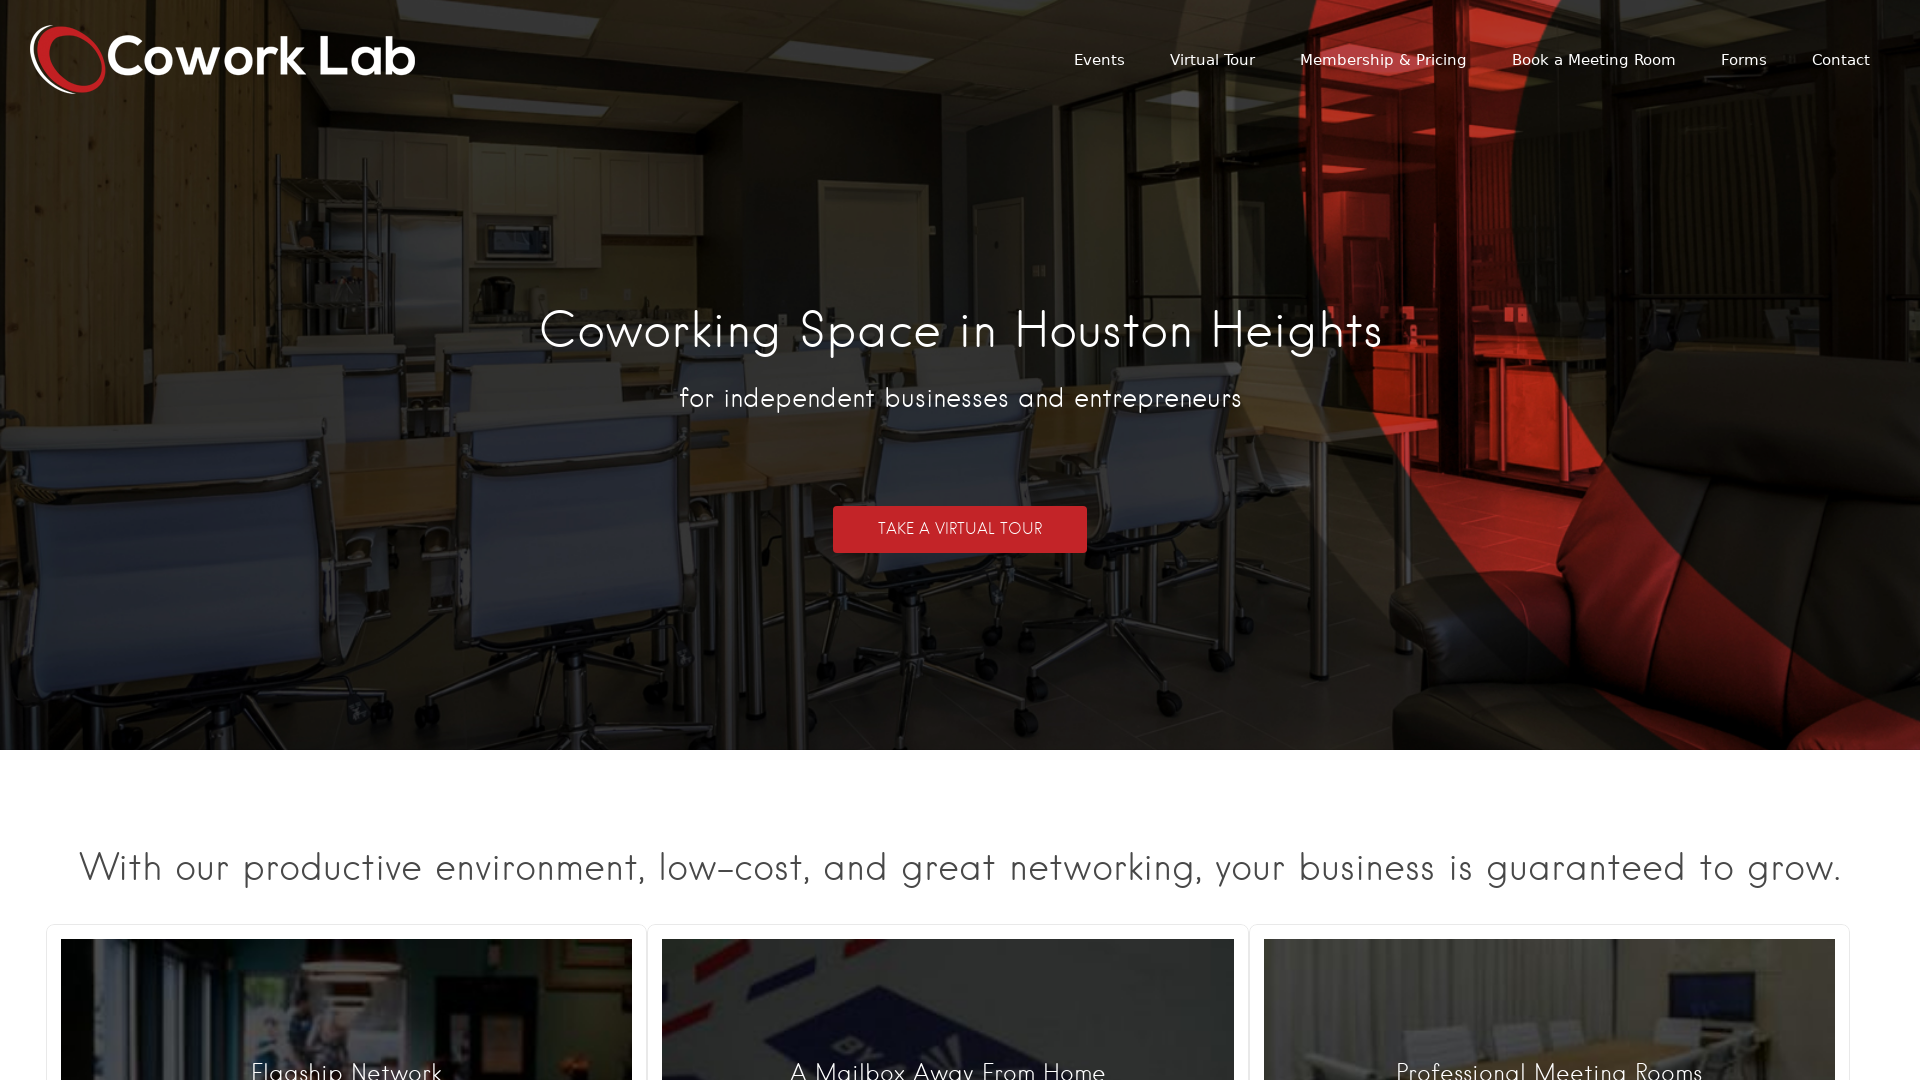 The Cowork Lab